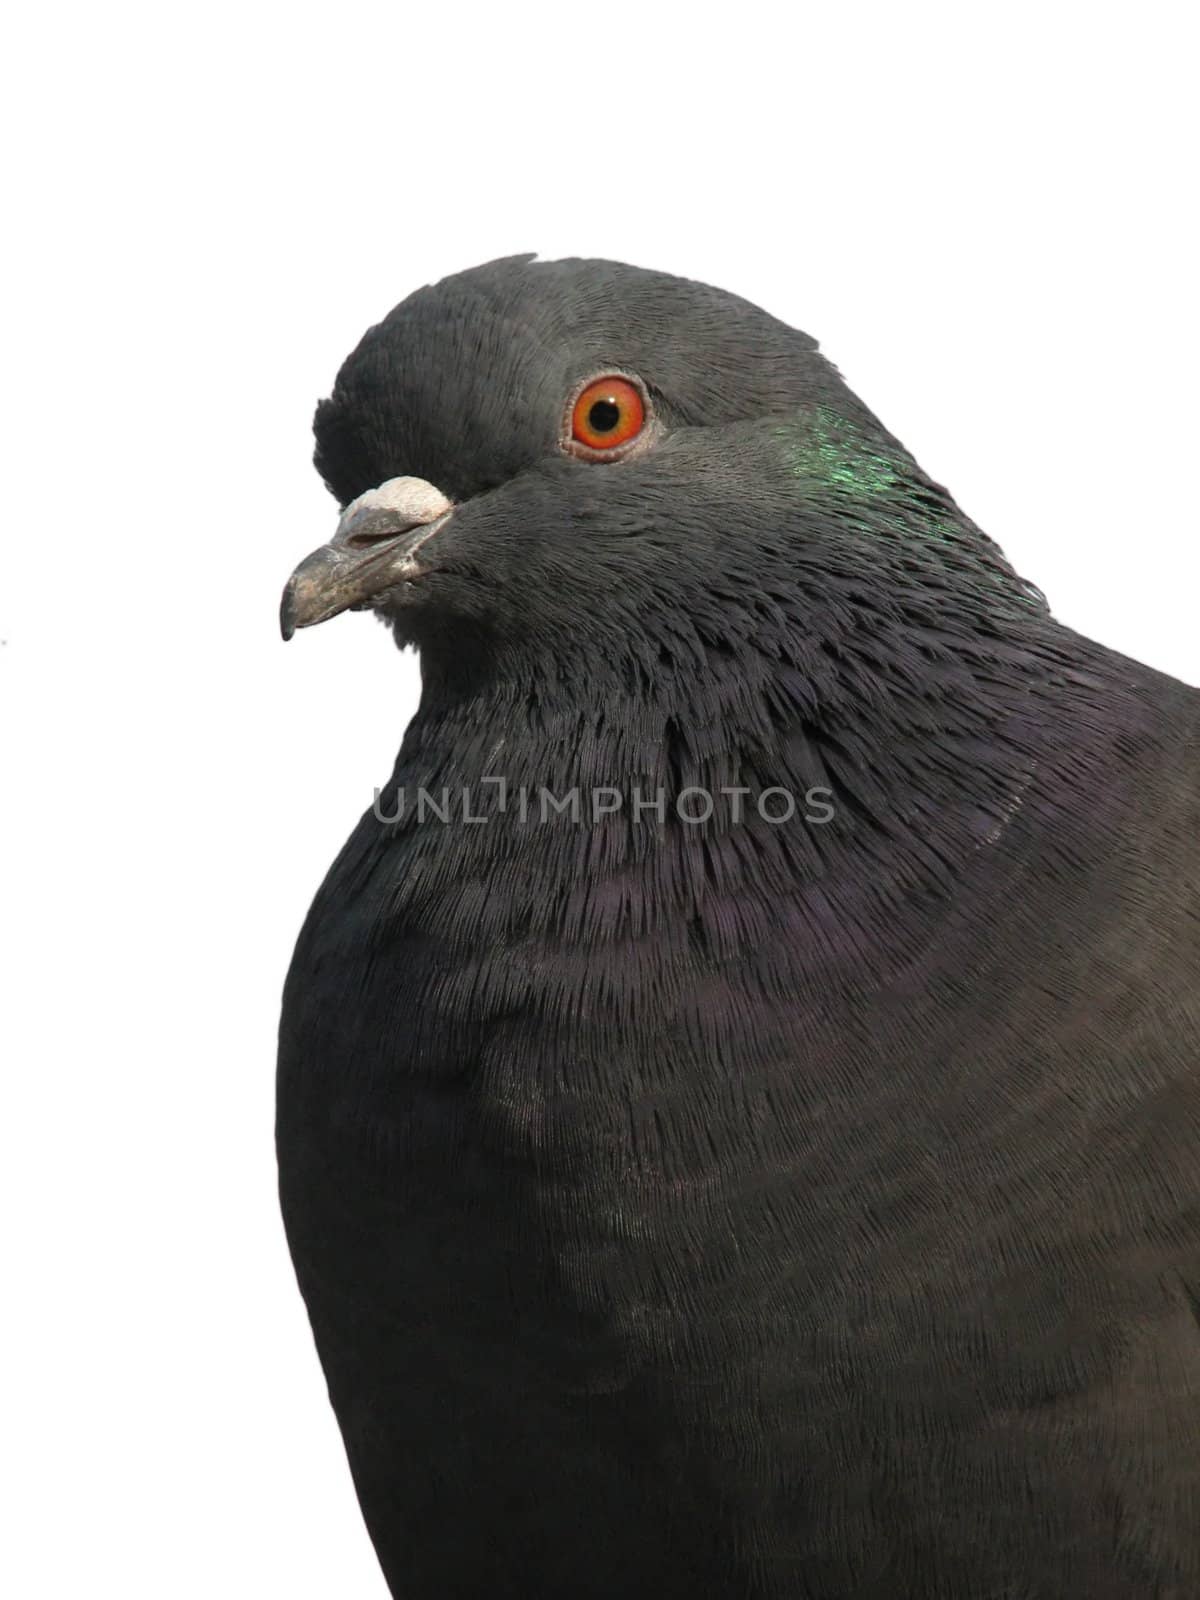 An isolated photo of a pigeon on a white background